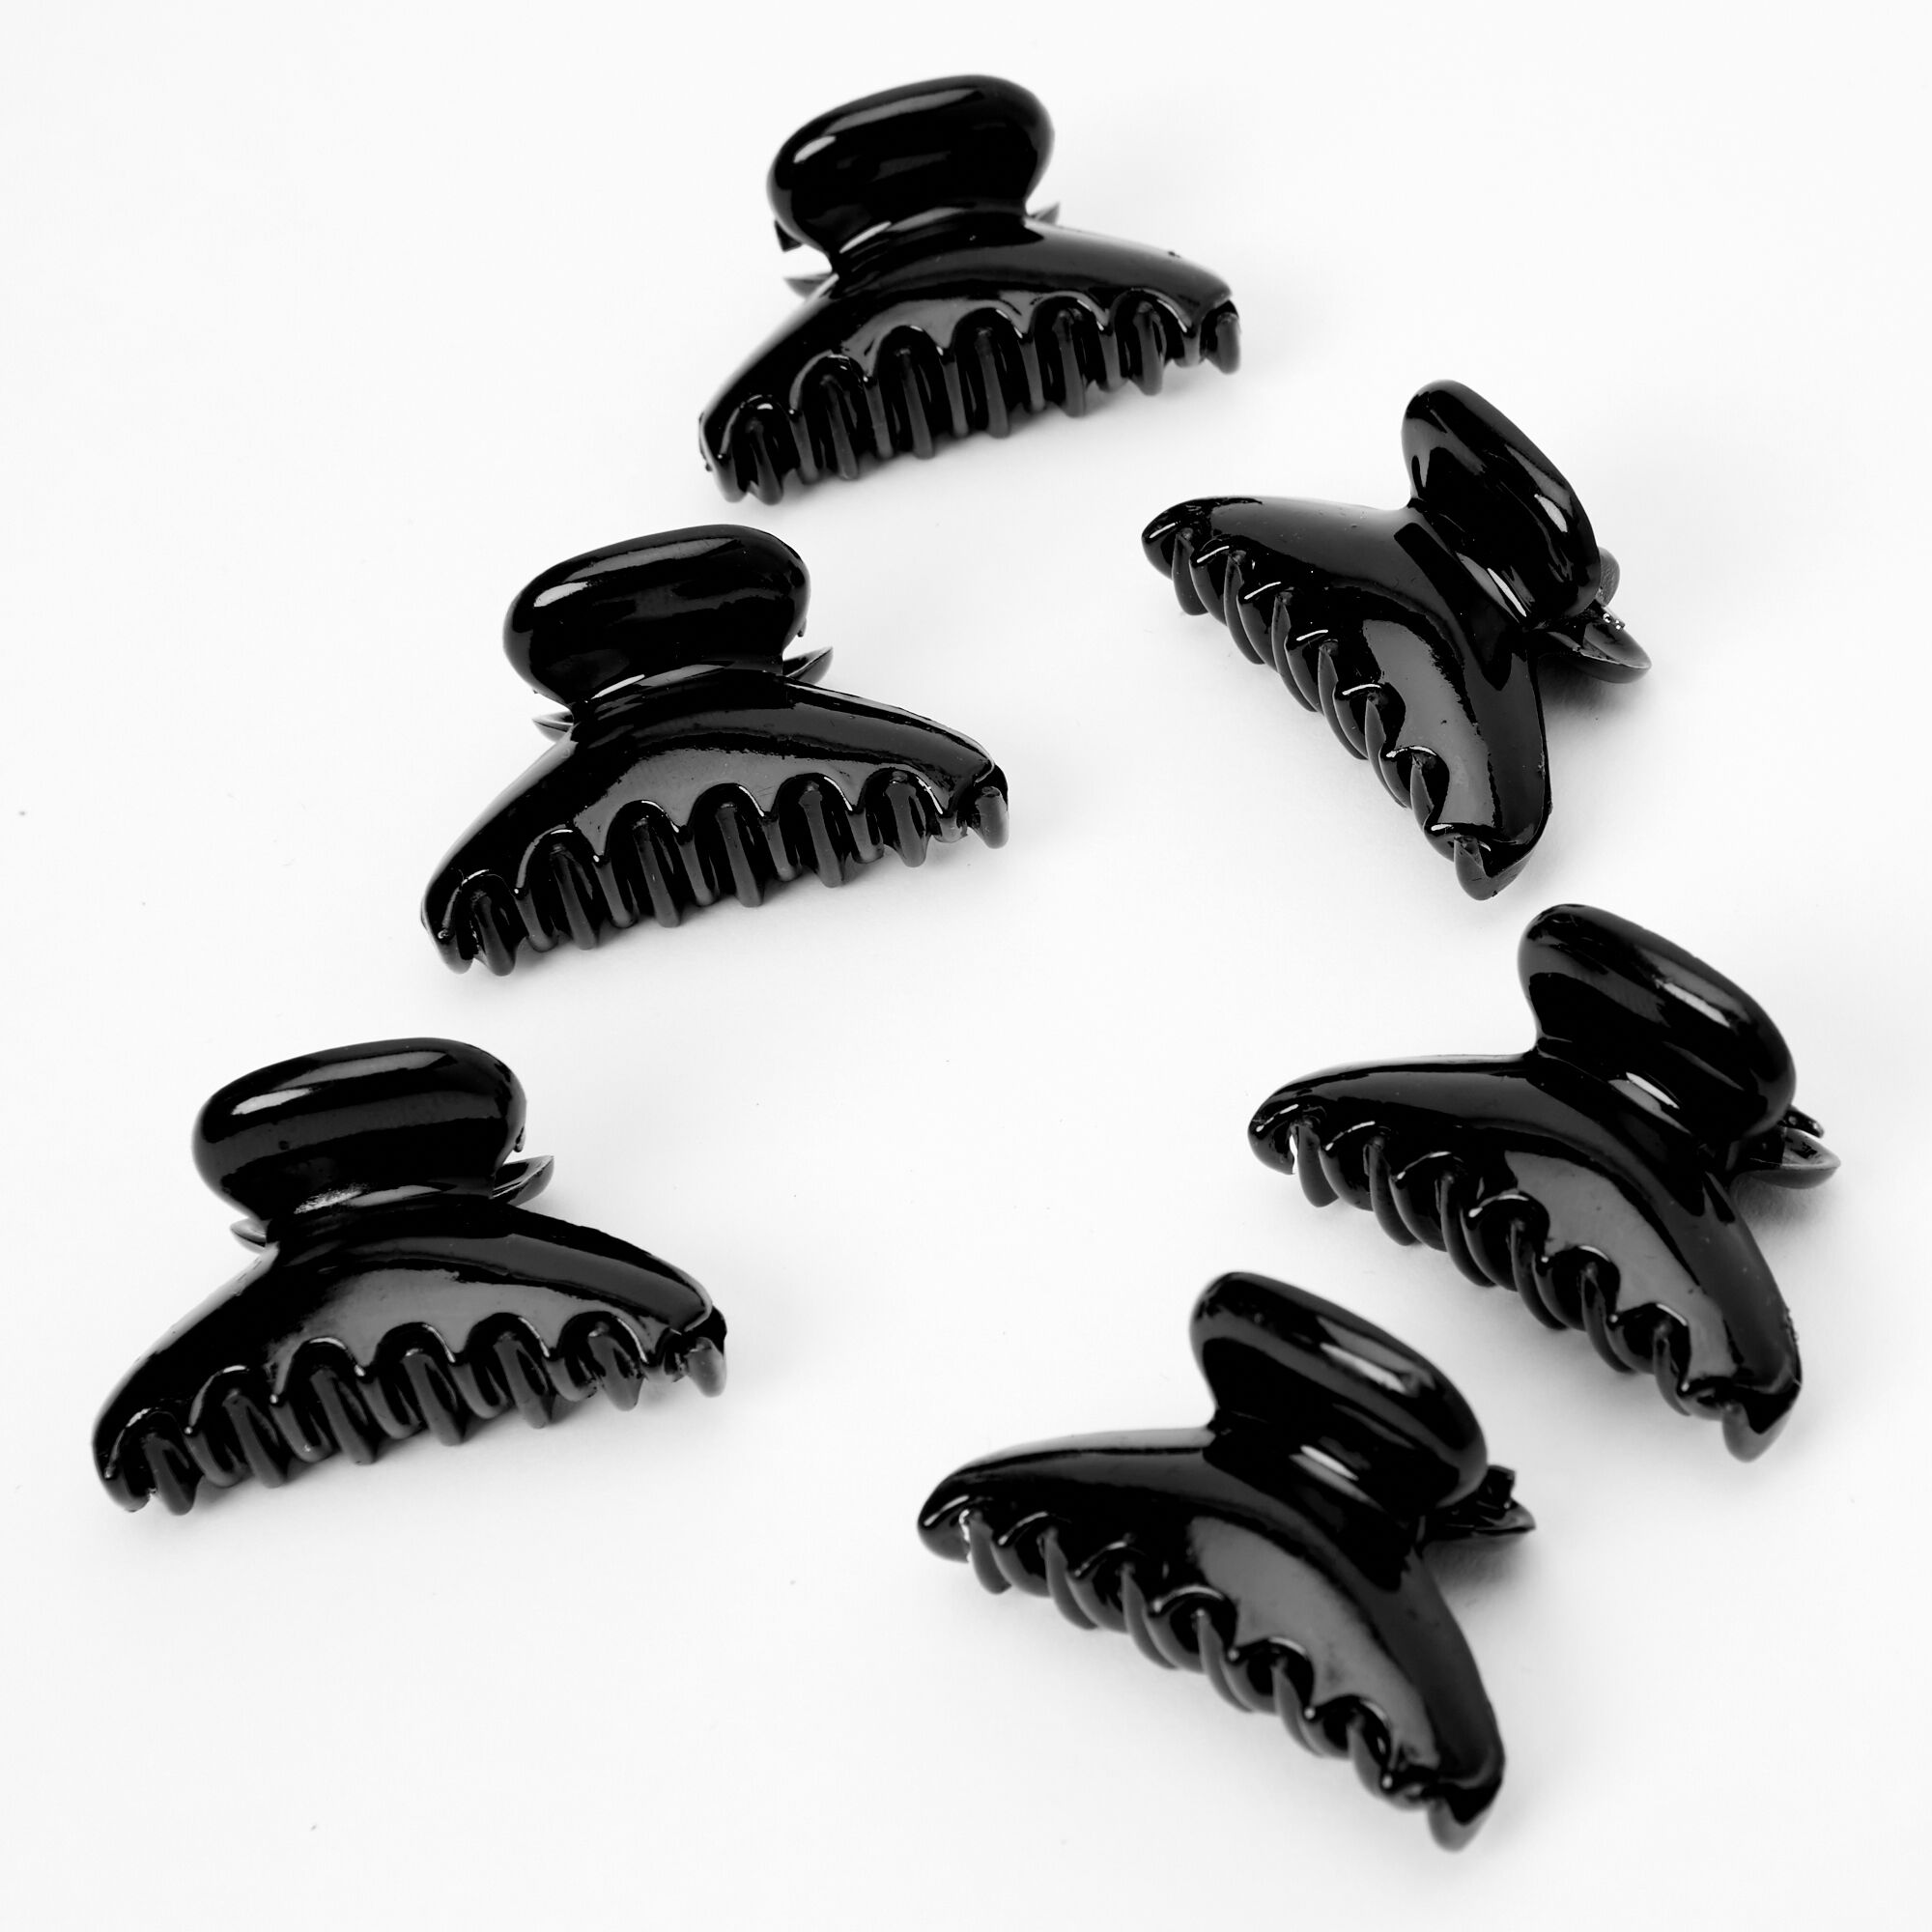 View Claires Curved Mini Hair Claws 6 Pack Black information